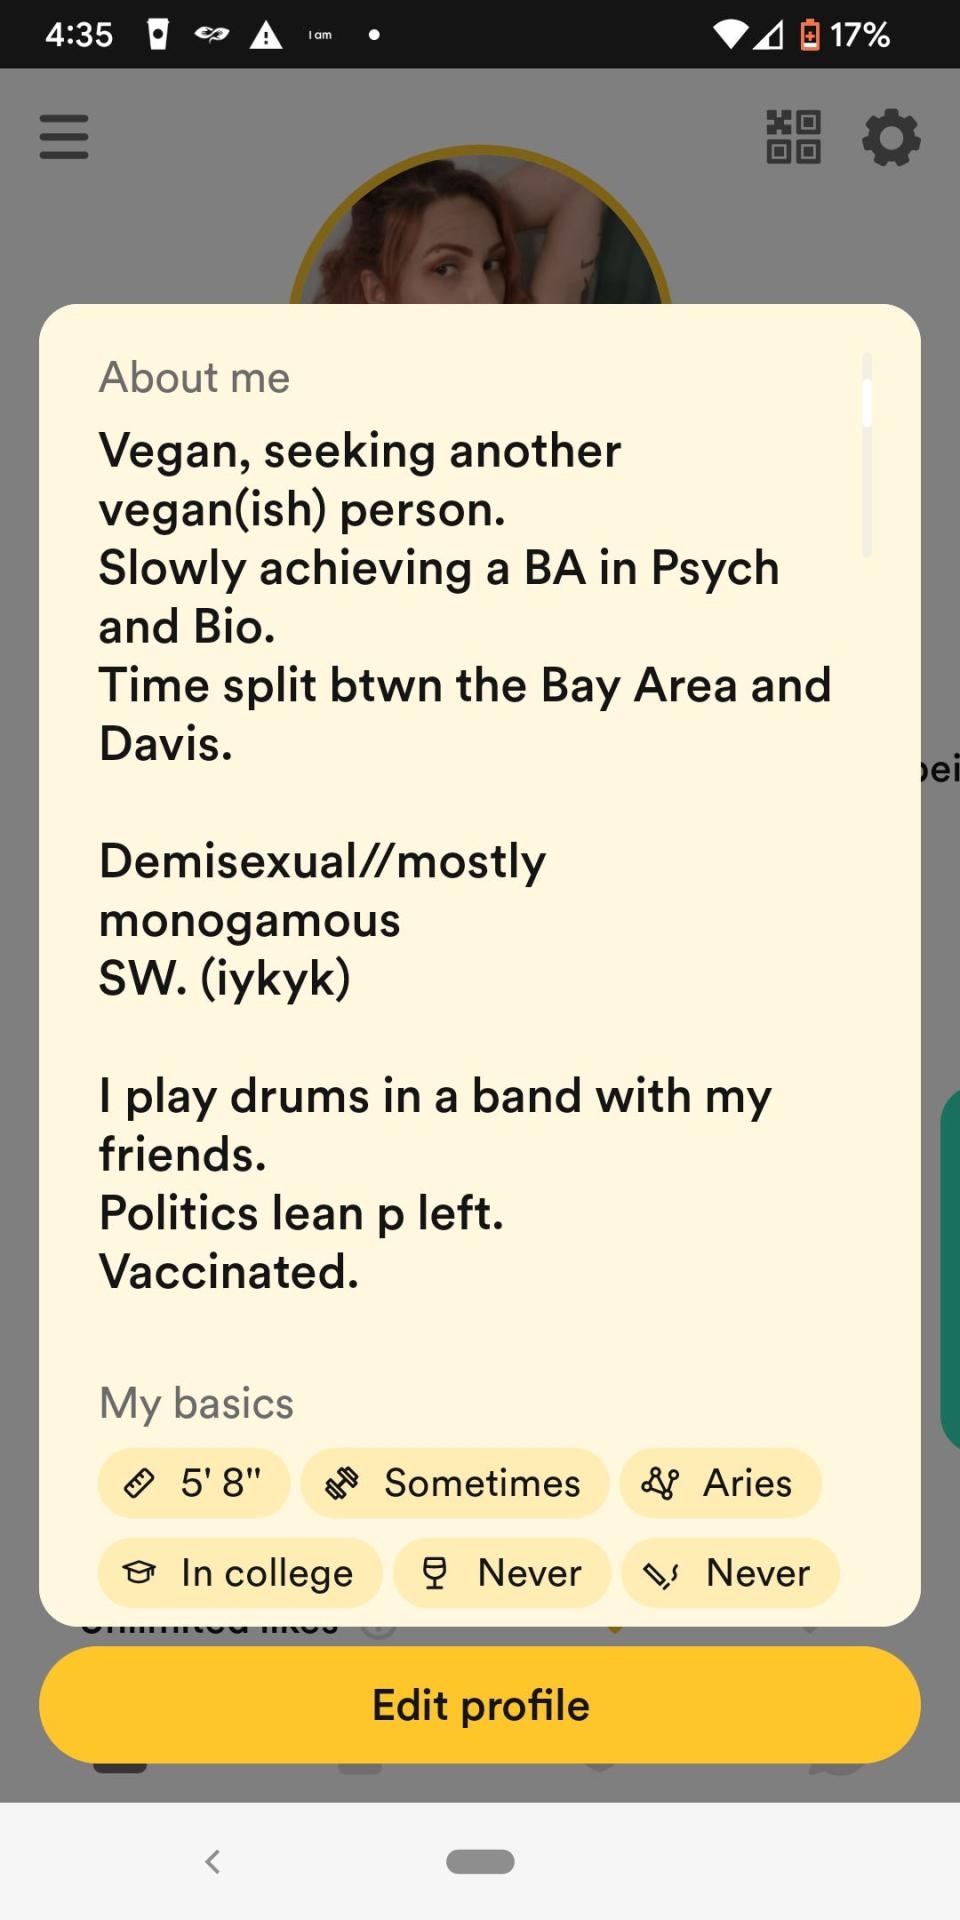 A screenshot of a person's dating profile.